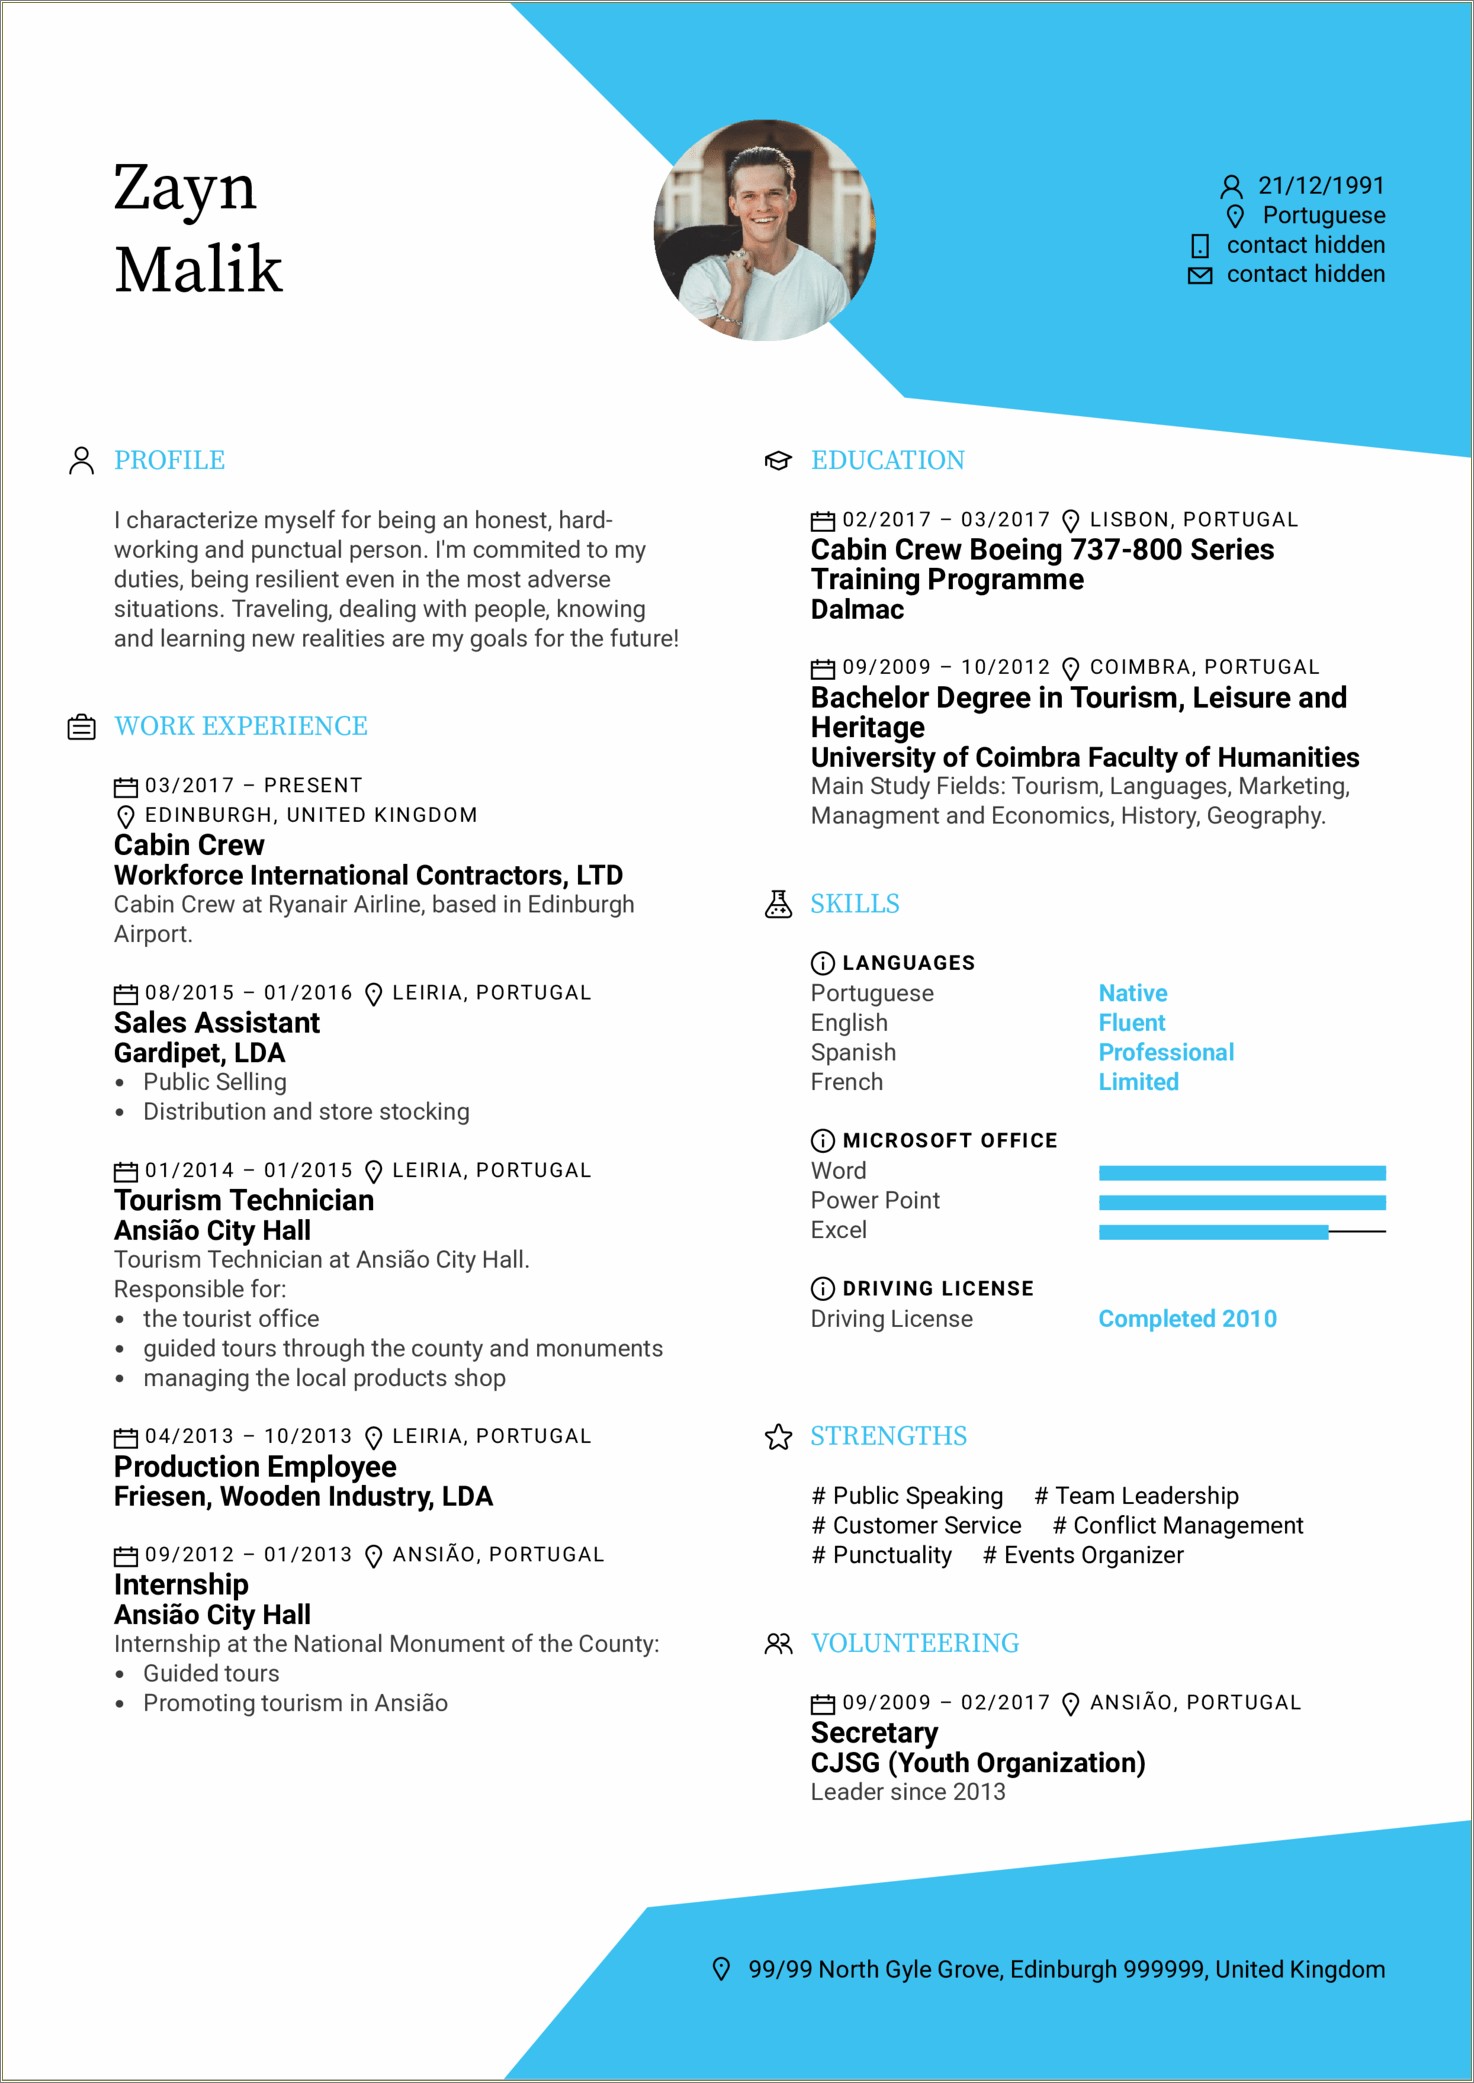 Resume Sample For Boeing Executive Administrative Assistant